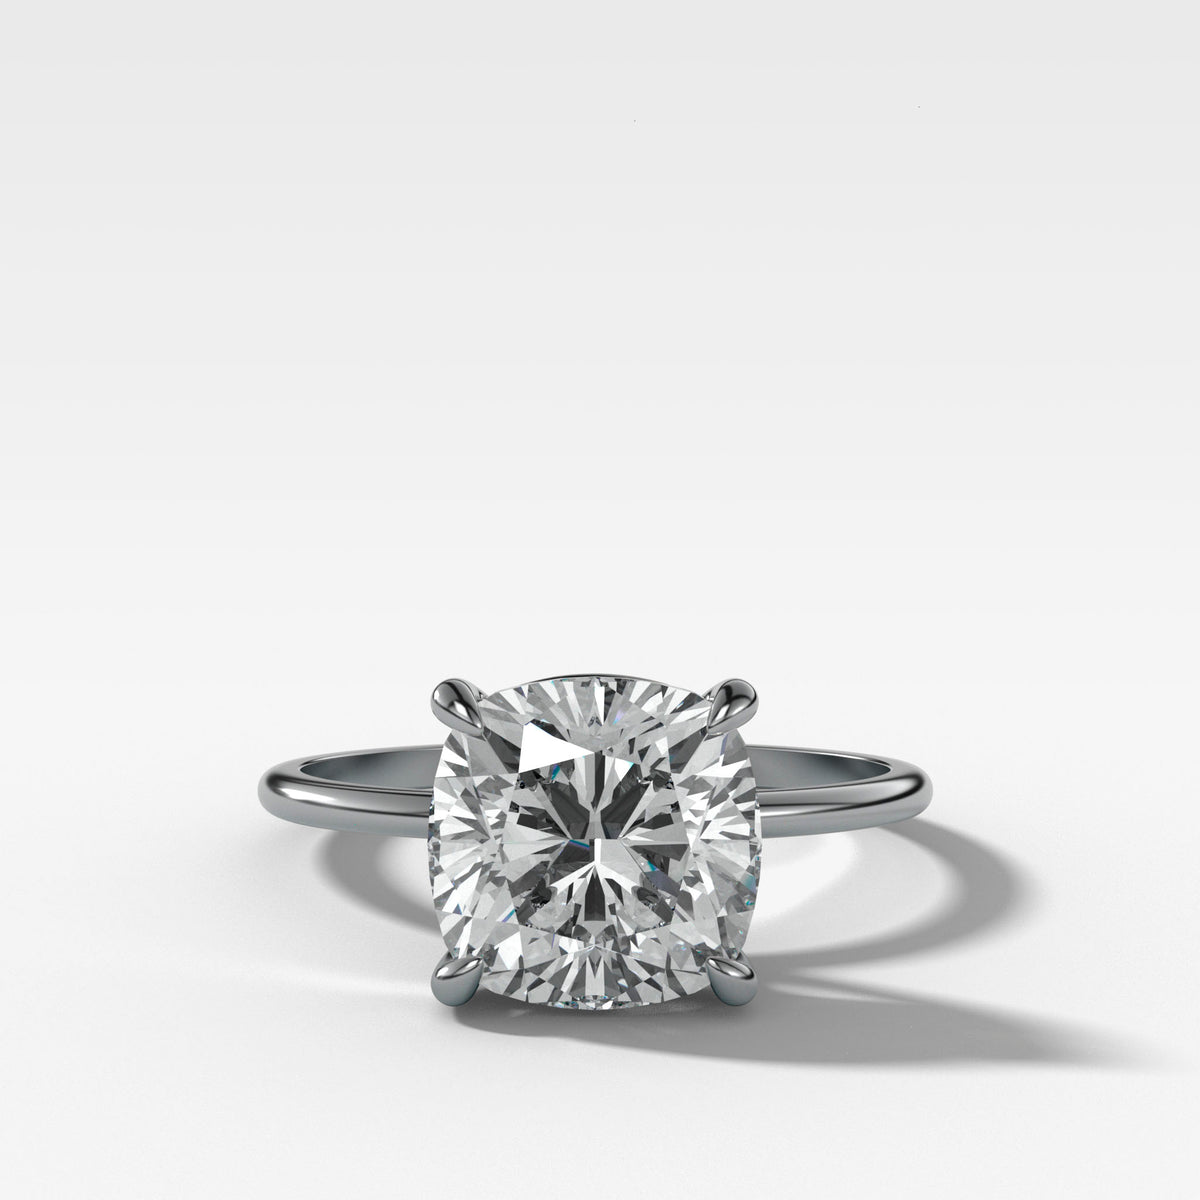 Thin + Simple Solitaire Engagement Ring With Cushion Cut Diamond